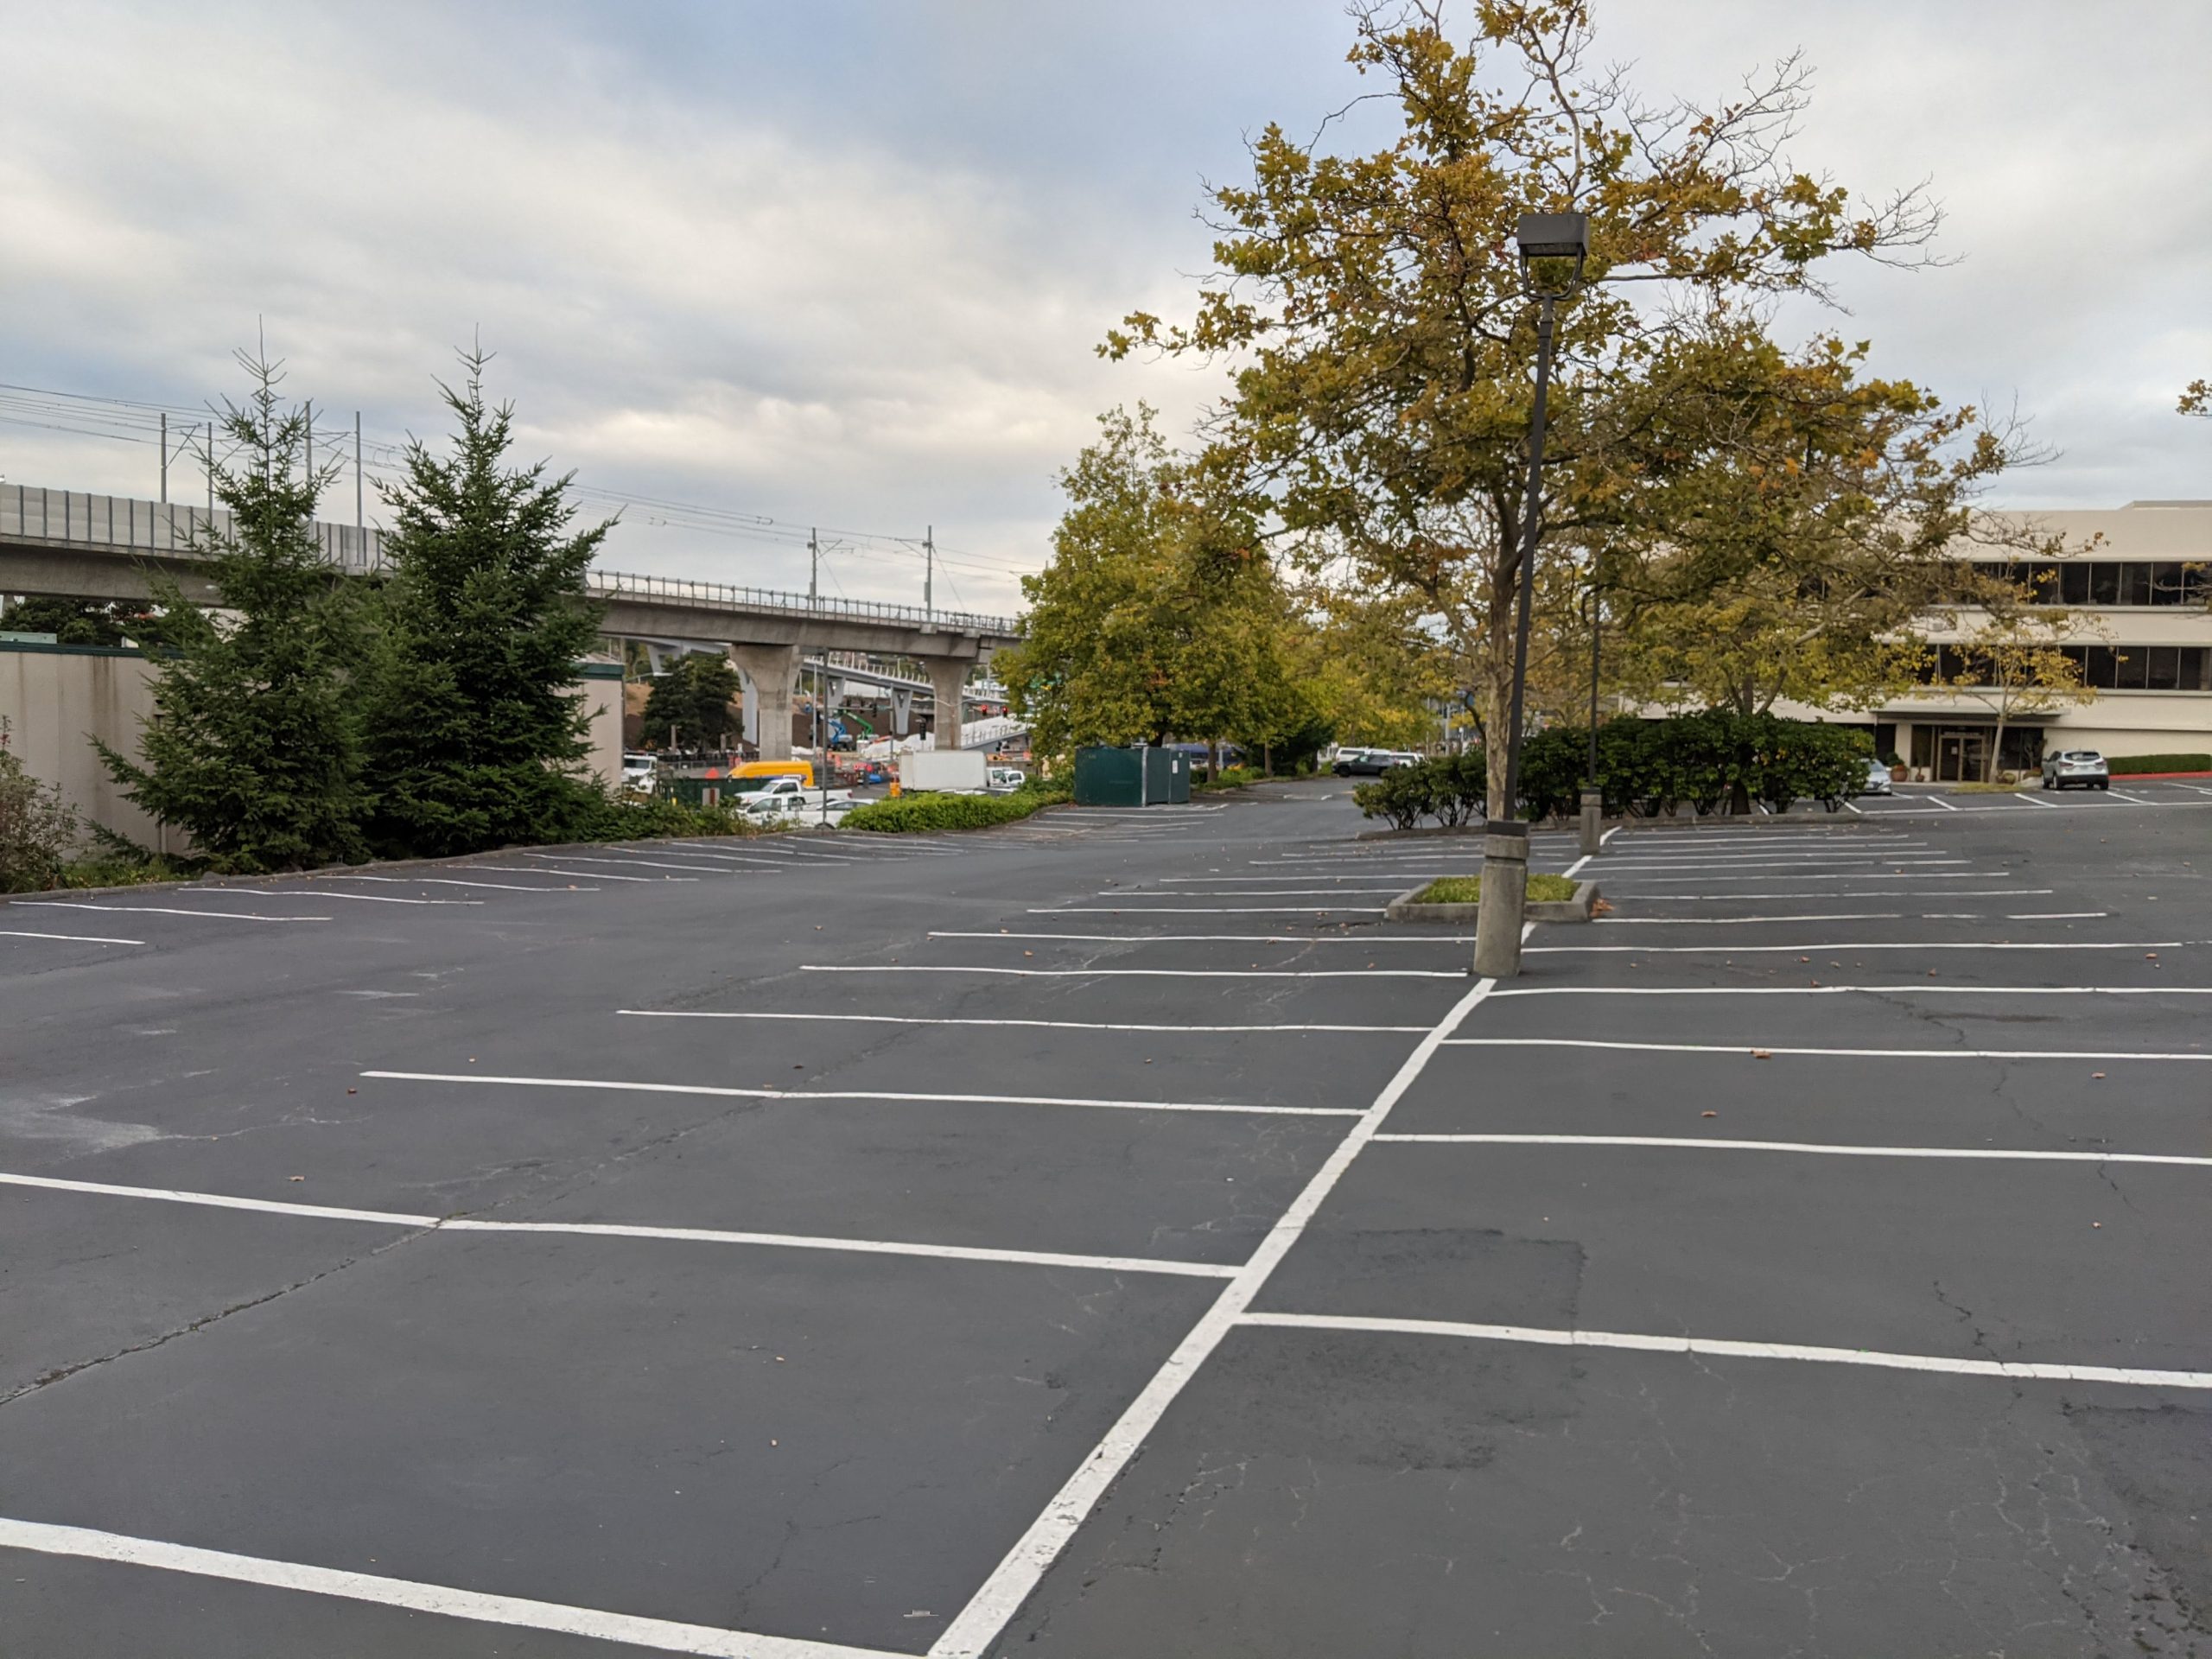 A photo of a parking lot close to the Northgate light rail station